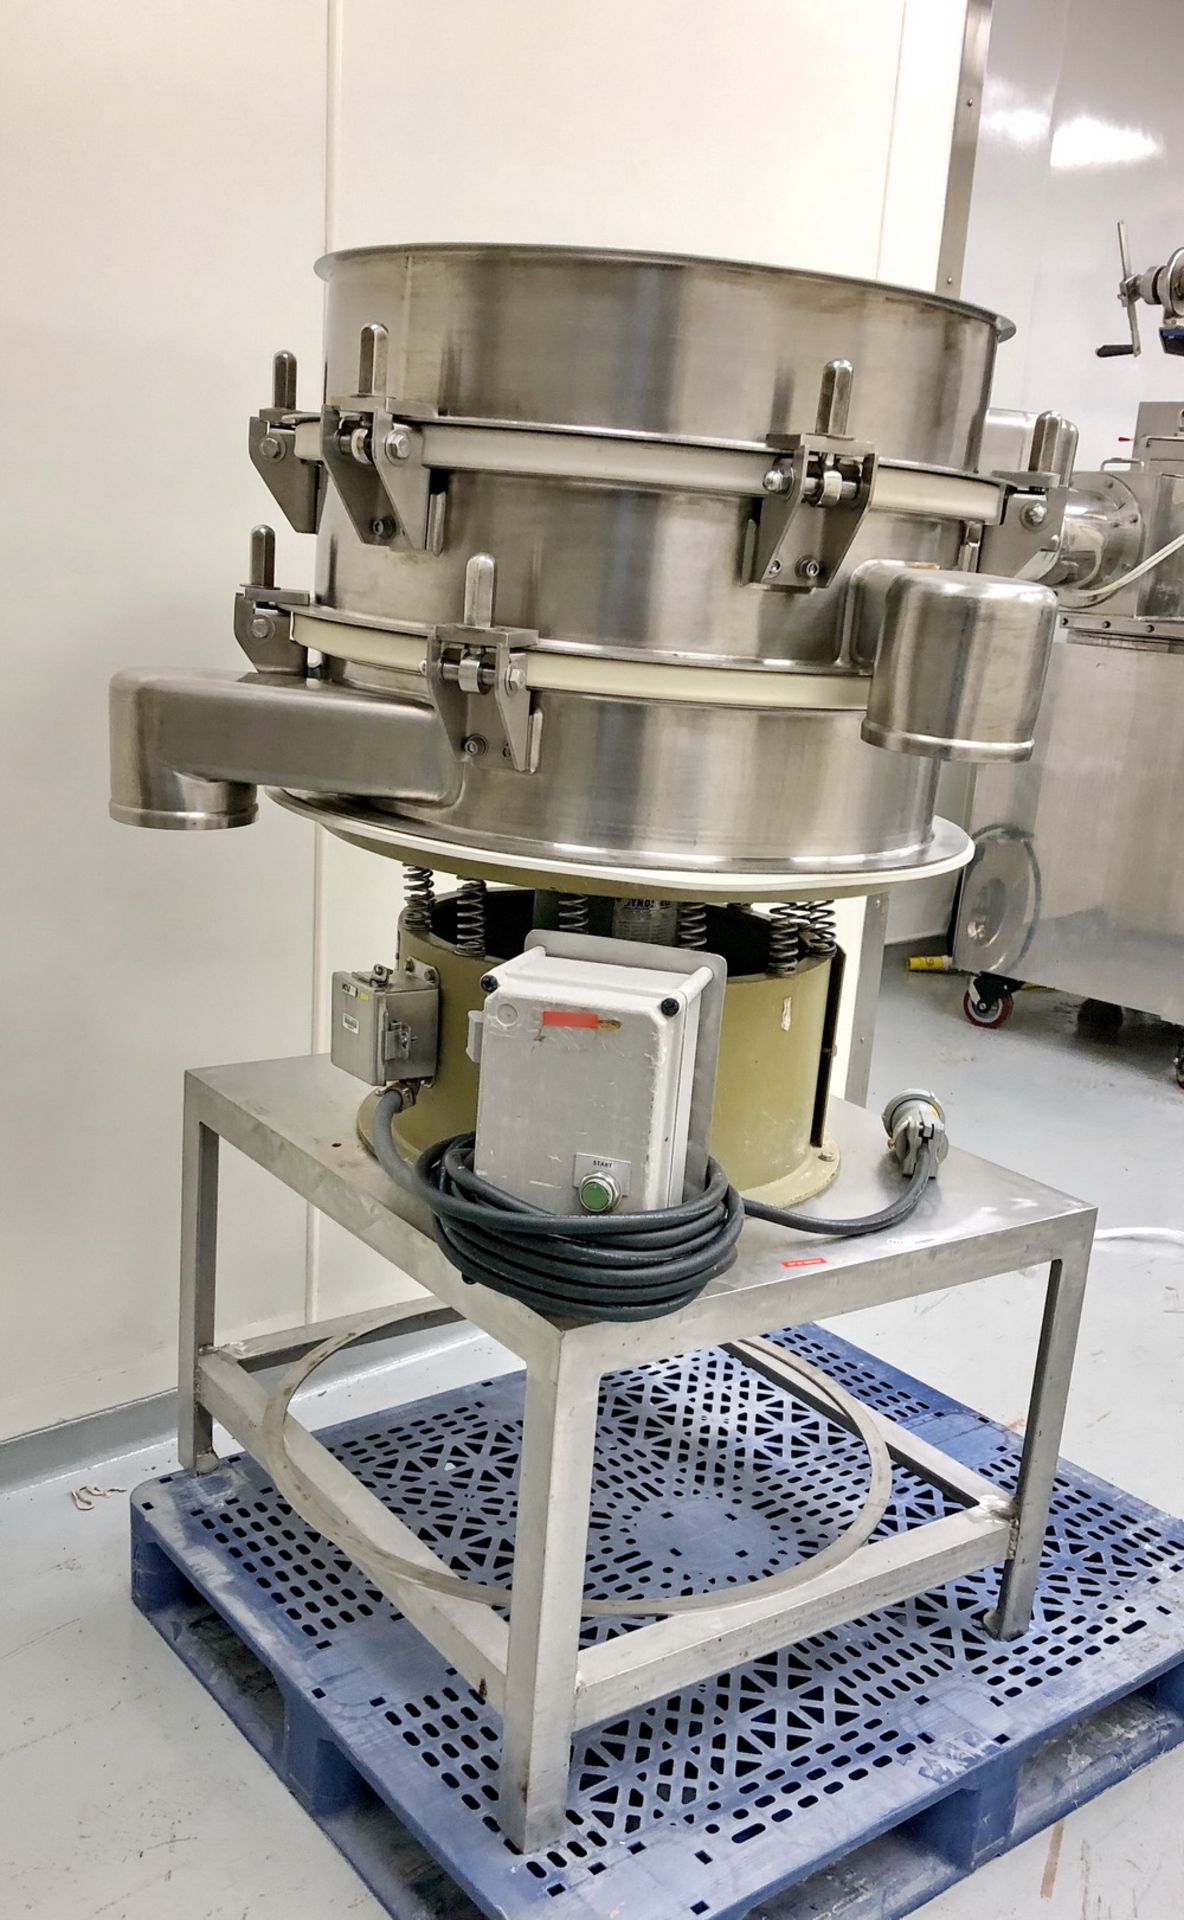 Sweco 30" Stainless Steel Double Deck Sifter, Model S30S66, S/N S30-467